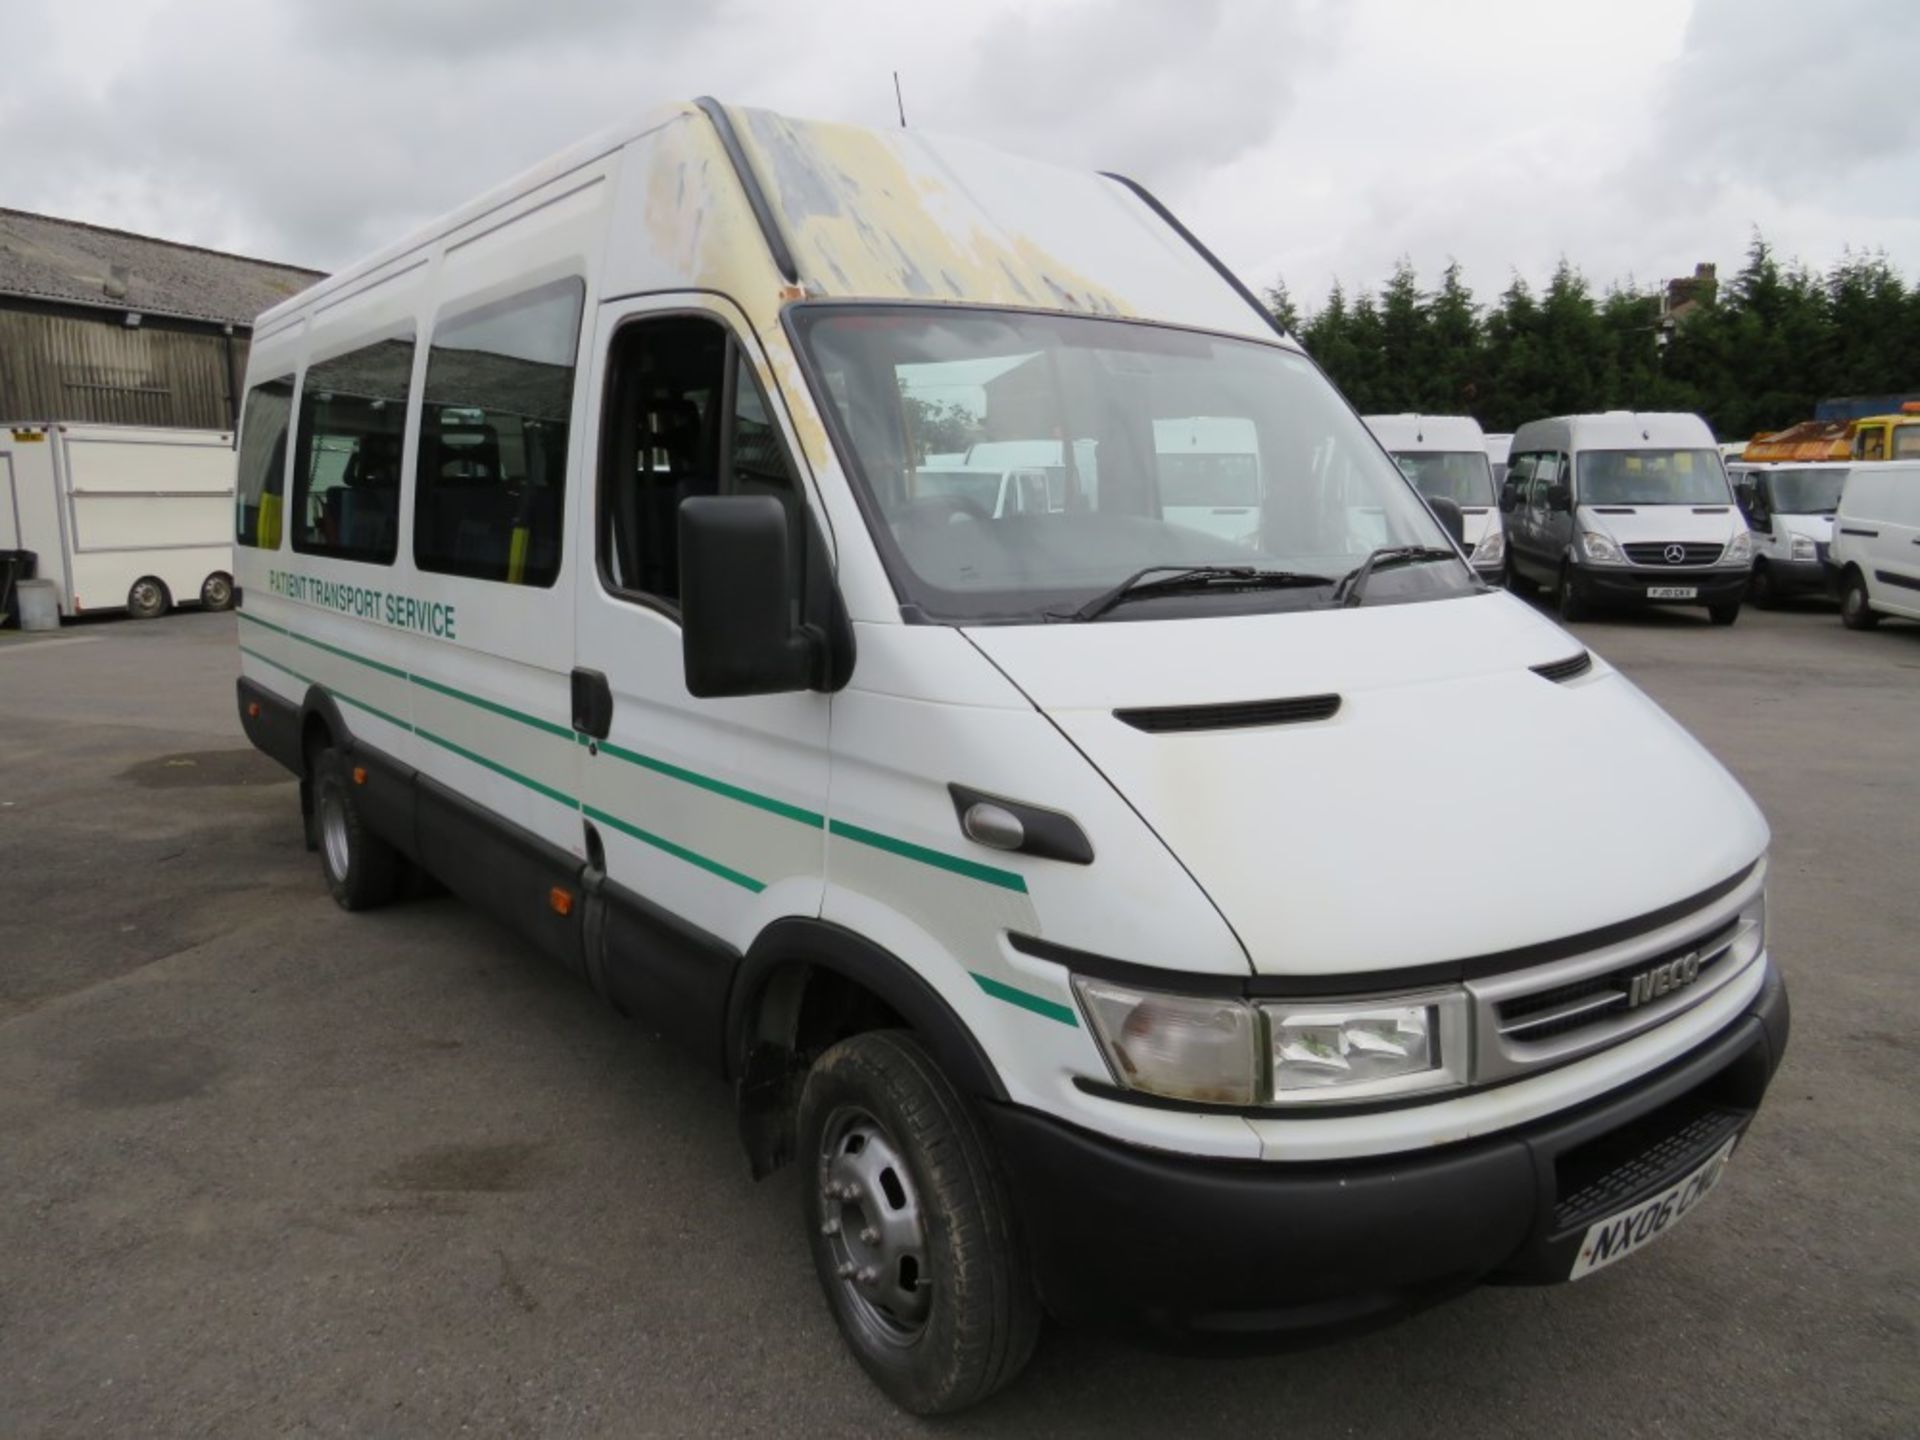 06 reg IVECO DAILY 40C14 BUS, 1ST REG 03/06, 120864KM WARRANTED, V5 HERE, 1 OWNER FROM NEW [+ VAT]